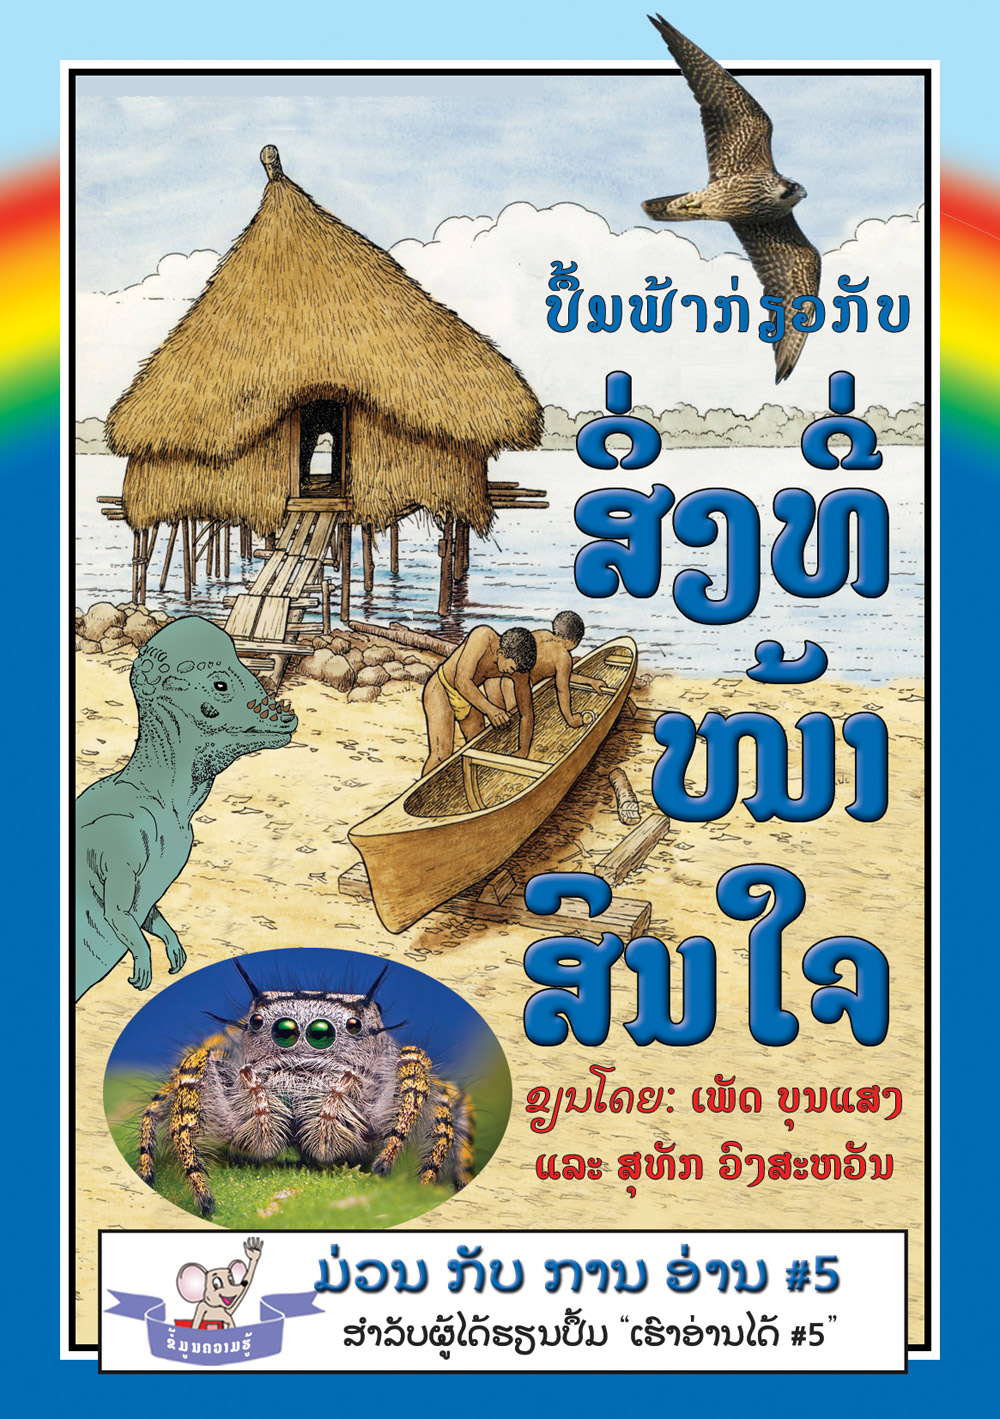 The Blue Book of Interesting Facts large book cover, published in Lao language